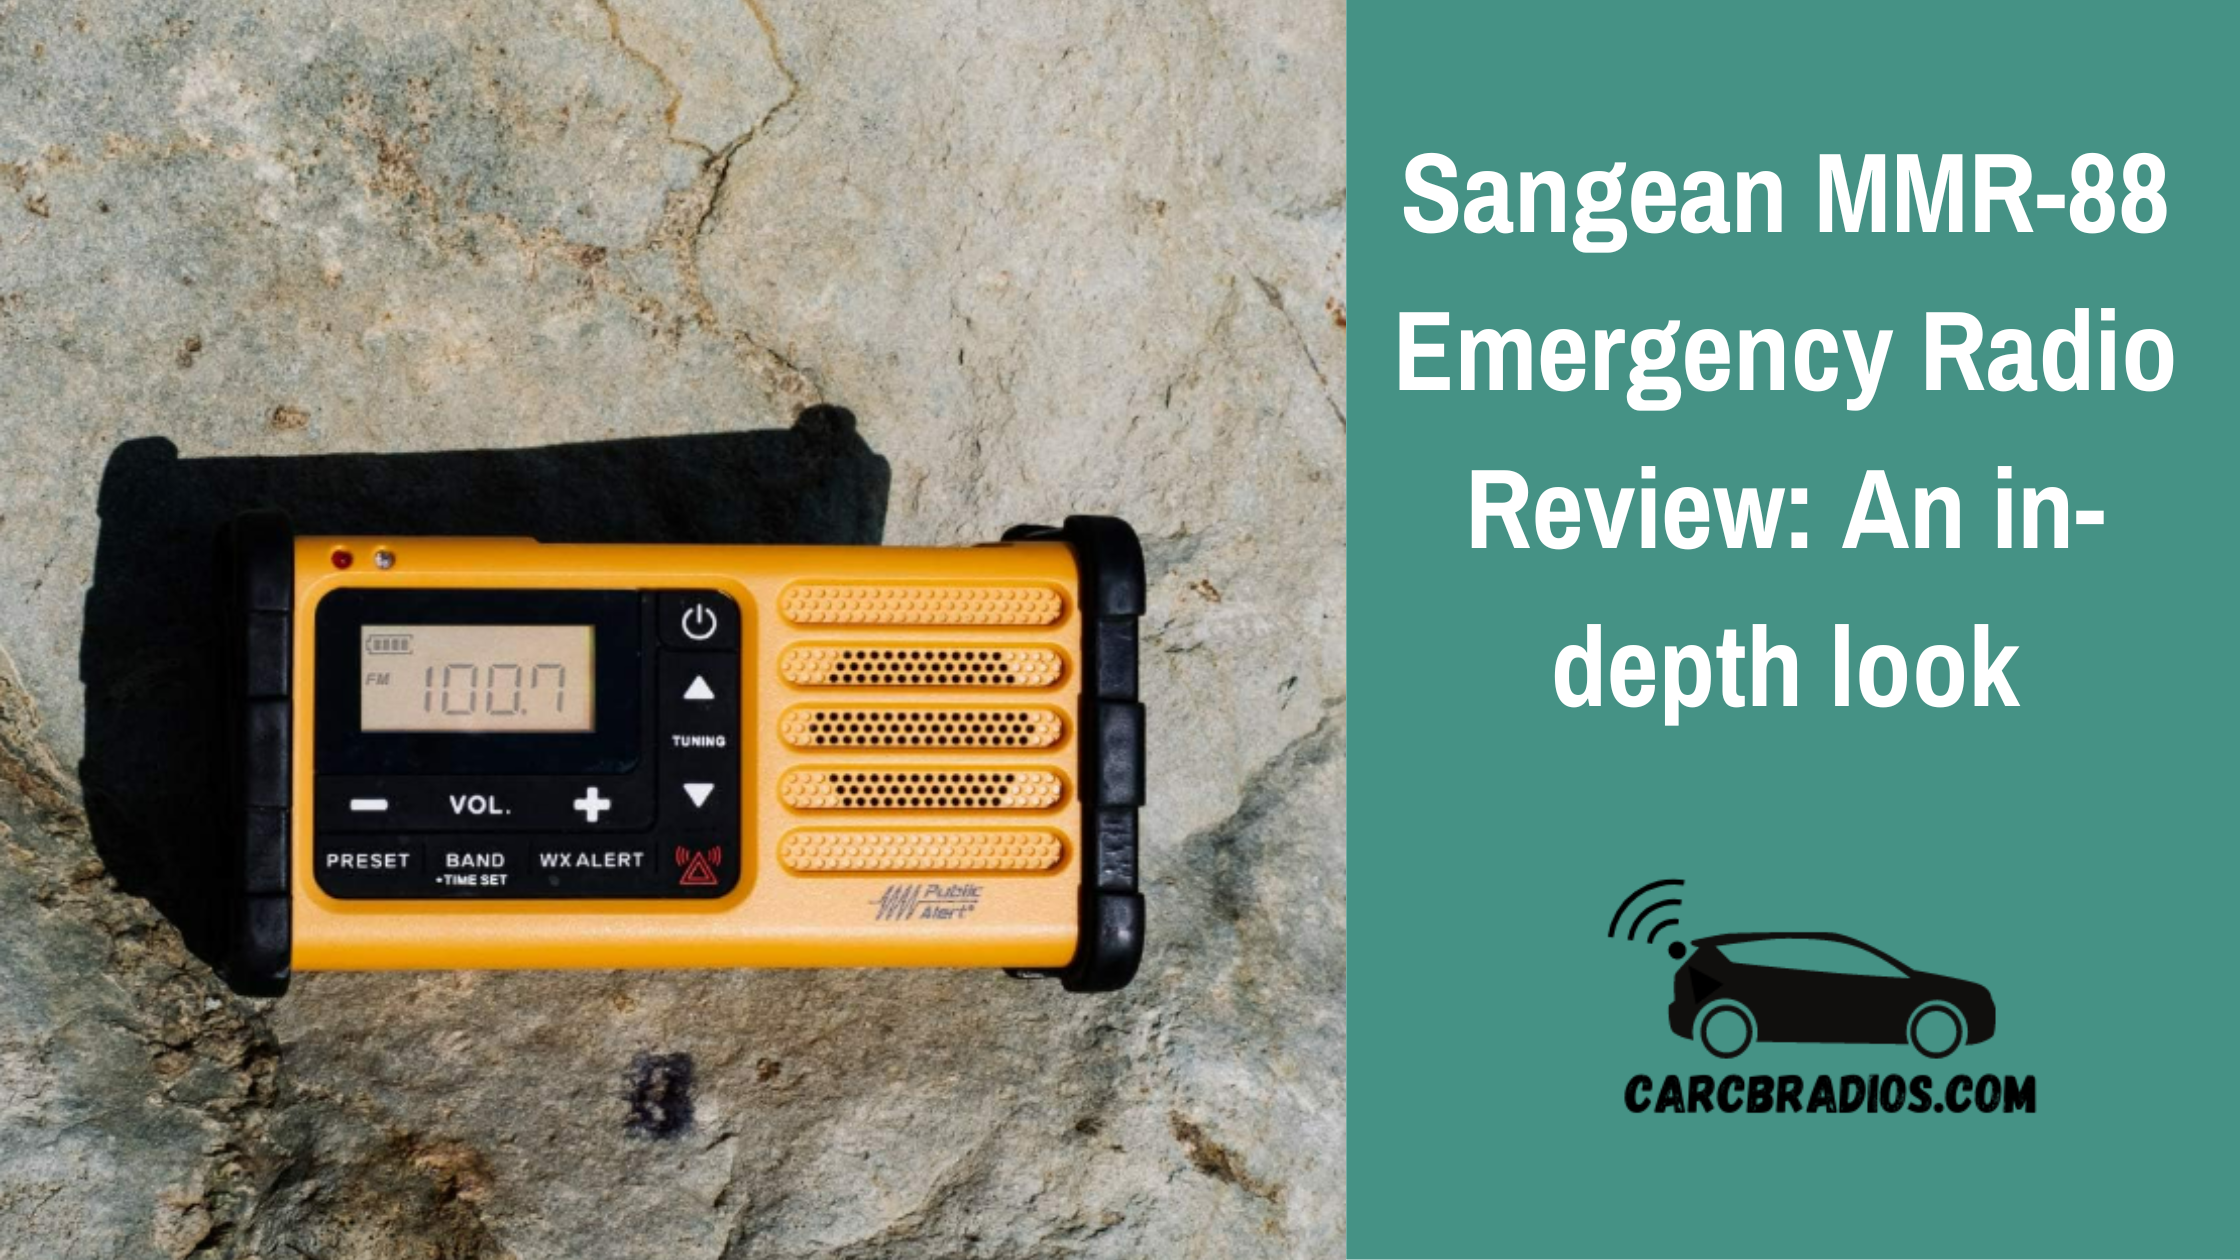 The Sangean MMR-88 Emergency Radio is a versatile device that can be used in a variety of situations. Whether you are camping, hiking, or just need a reliable radio in case of an emergency, this radio has got you covered. It is equipped with AM/FM radio, weather alerts, and a flashlight, making it an essential tool for any outdoor adventure or emergency situation. The radio also has a built-in clock, adjustable LED flashlight, and a hand-held size that makes it easy to carry around.